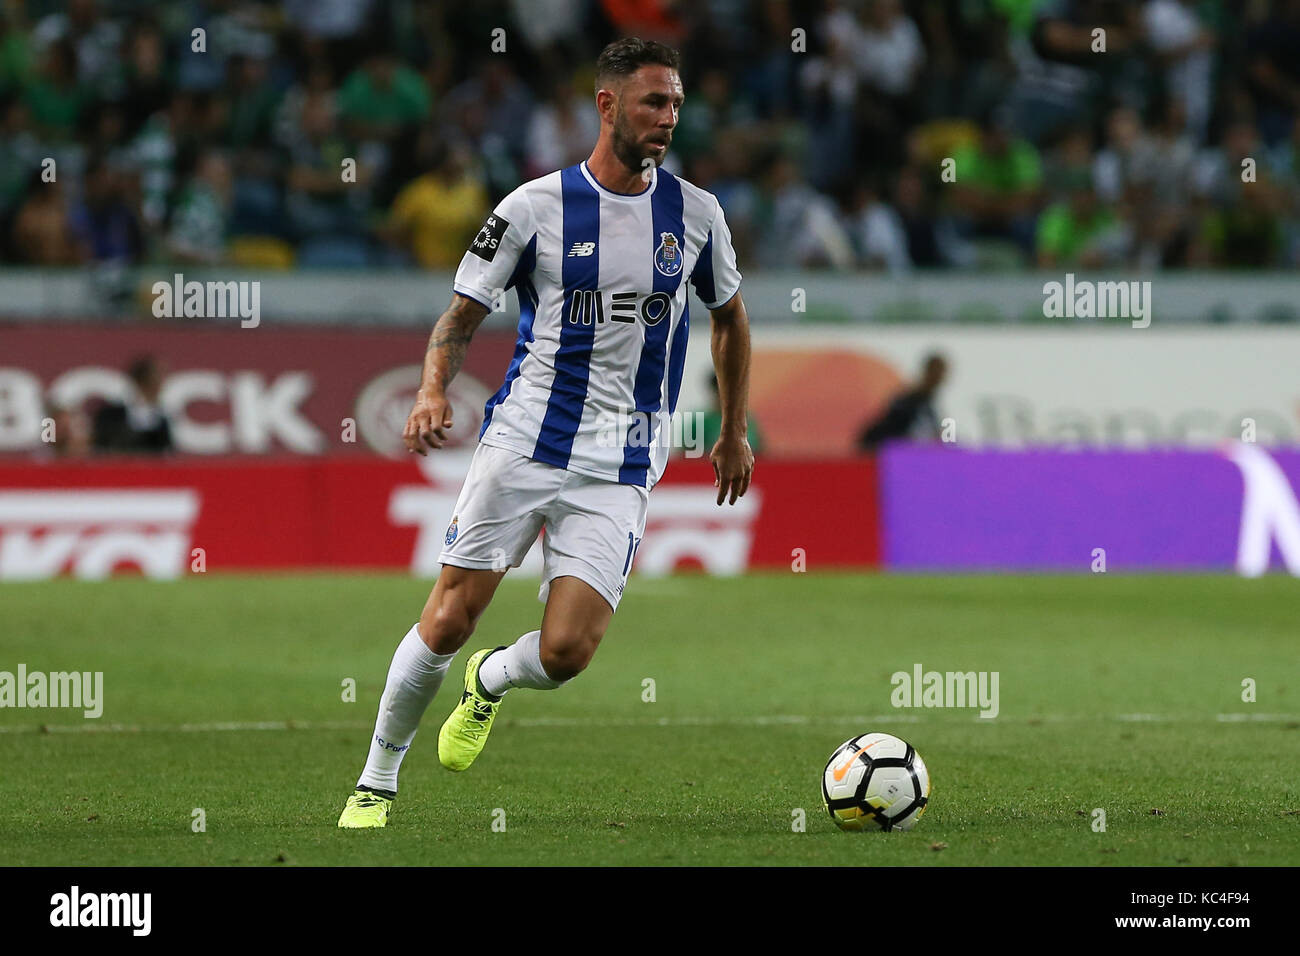 Lisbon, Portugal. 01st Oct, 2017. FC PortoÕs defender Miguel Layun from Mexico  during Premier League 2017/18 match between Sporting CP and FC Porto, at Alvalade Stadium in Lisbon on October 1, 2017. (Photo by Bruno Barros / DPI) Credit: Bruno Barros/Alamy Live News Stock Photo